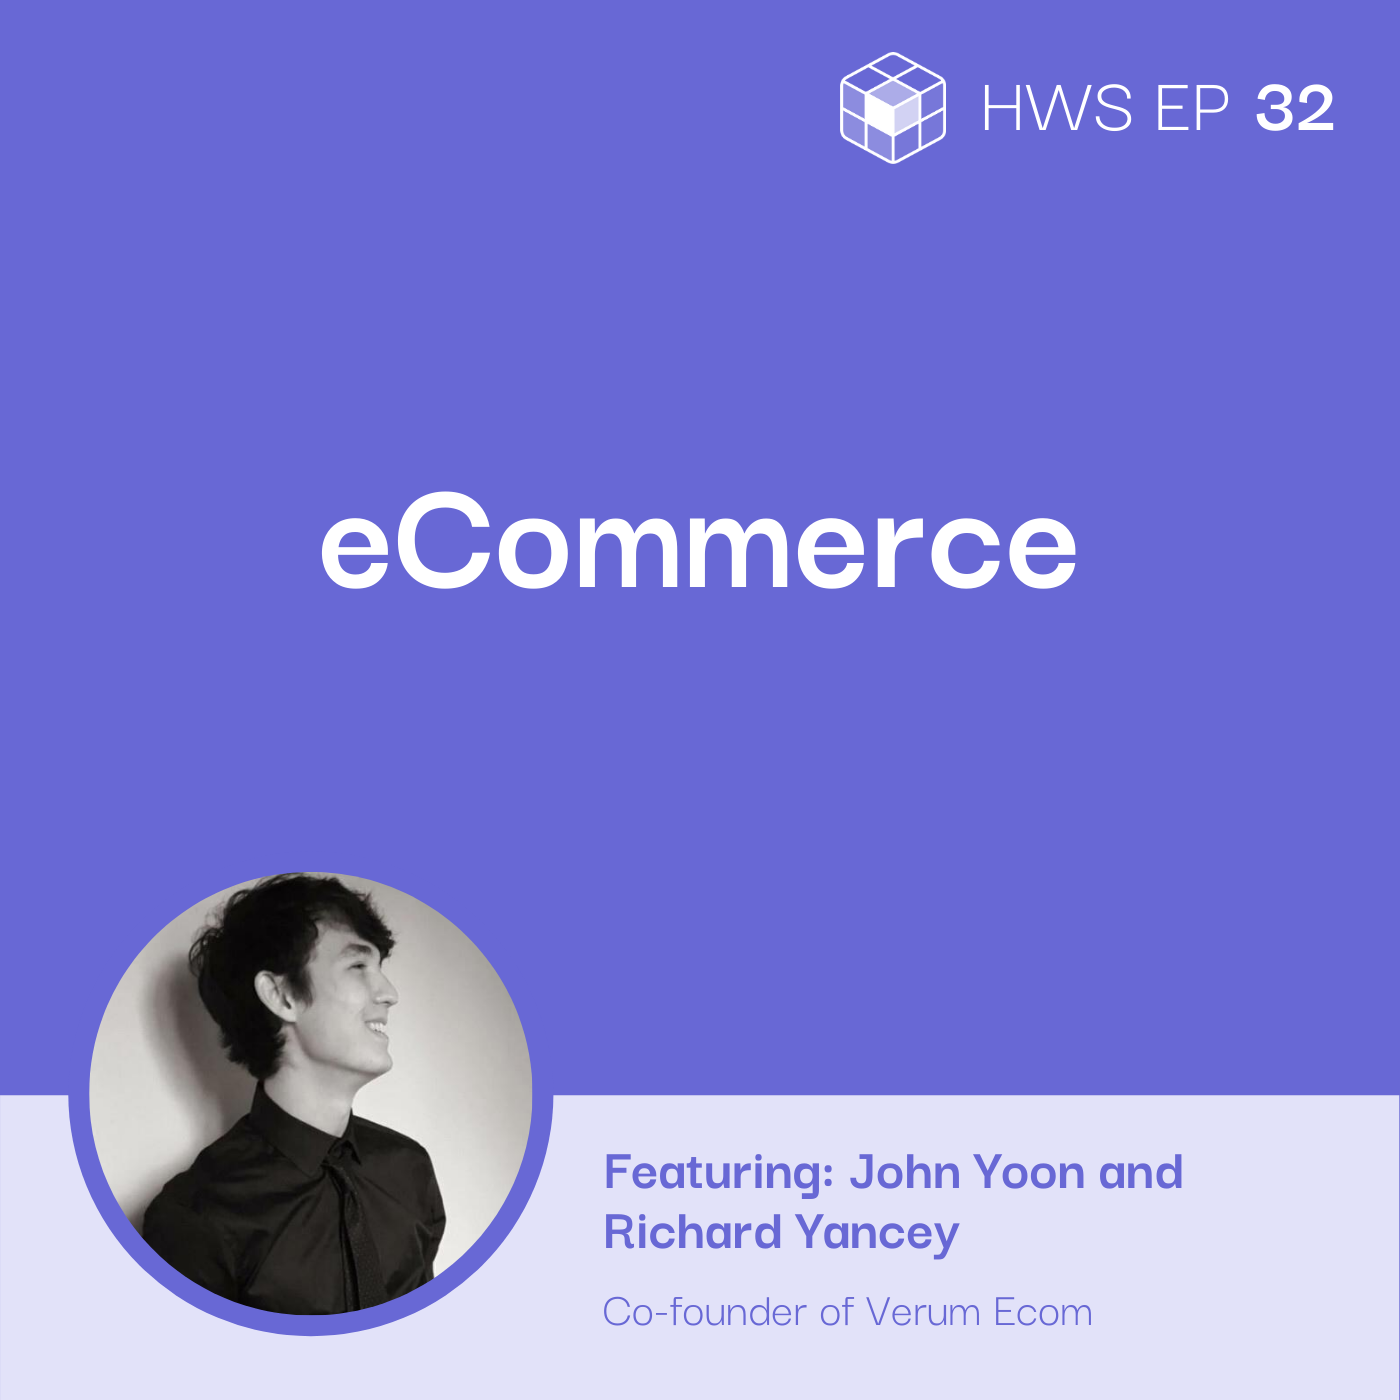 John Yoon and Richard Yancey on how they build a successful 8-figure eCommerce business